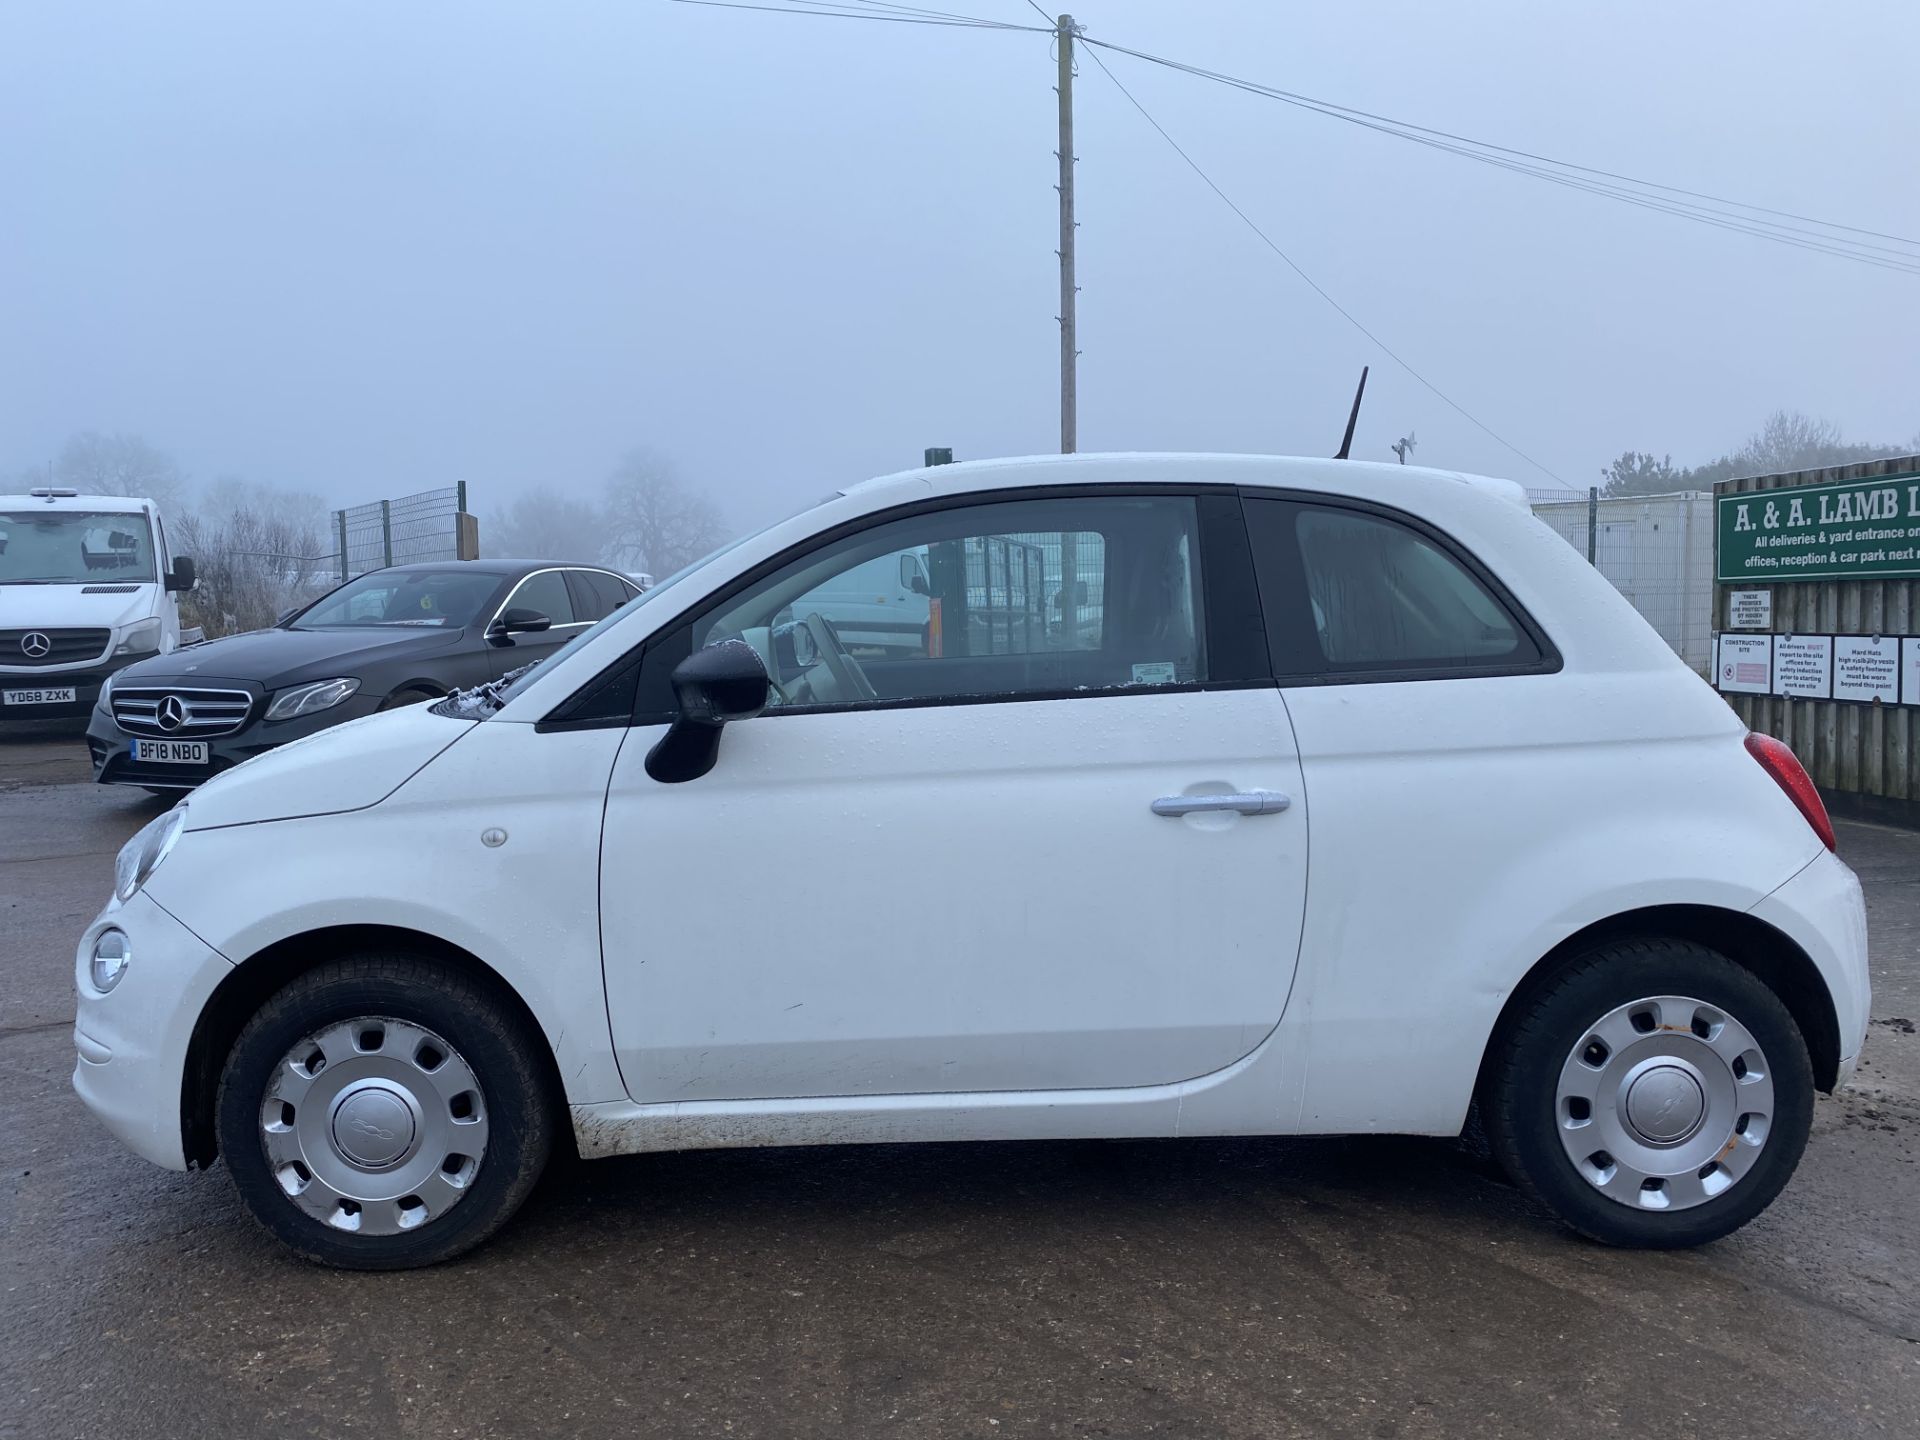 On Sale FIAT 500 "POP" 1.2 PETROL - 2016 MODEL - 1 KEEPER - ONLY 44K MILES FROM NEW - AIR CON - LOOK - Image 5 of 18